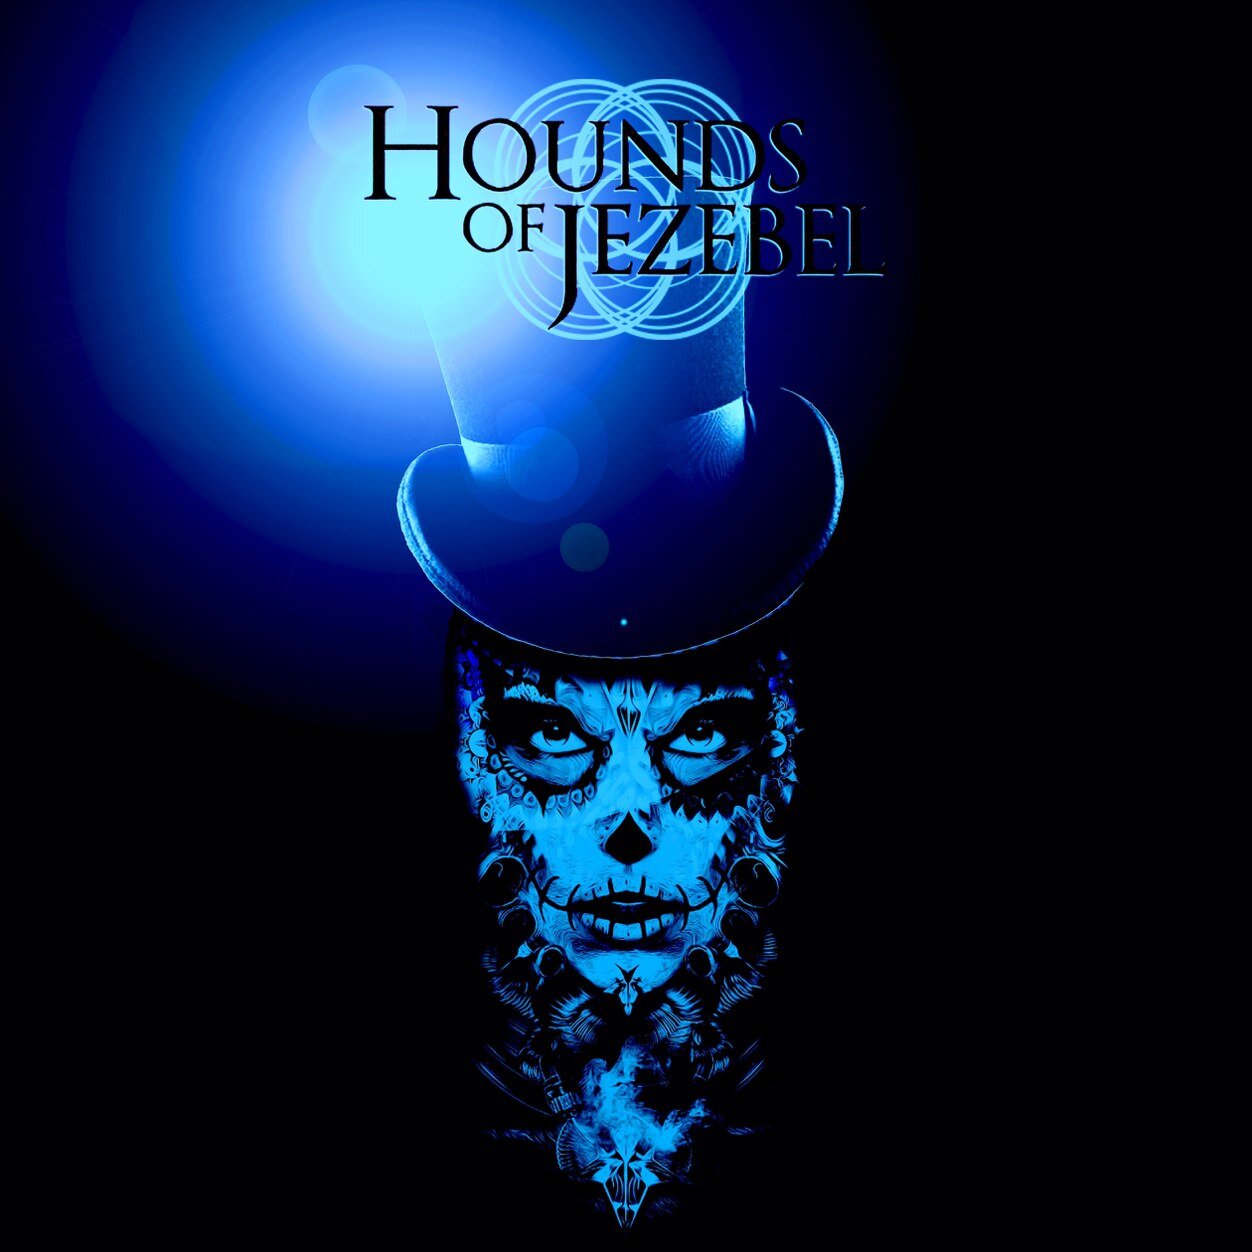 Hounds of Jezebel's new 5-song EP 'The Shakedown' is now available to purchase on CD or download - tap on website link below